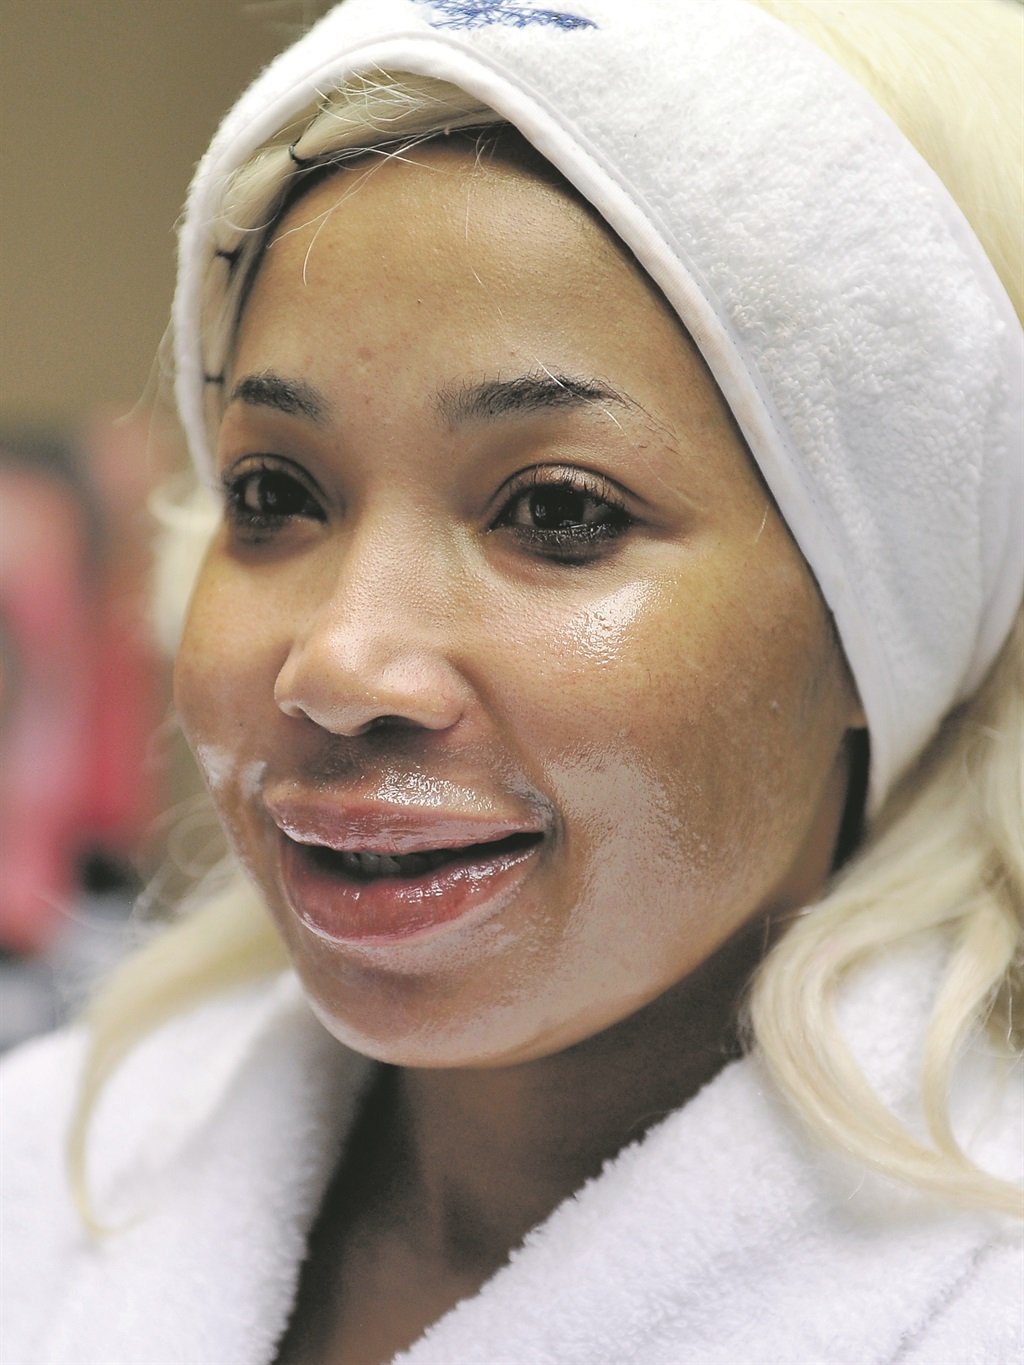 Mshoza, whose real name is Nomasonto Maswanganyi, prepares to have a series of surgical procedures done at the hands of Dr Claire Jacobsohn in her quest to look more like Nicki Minaj. Pictures: Lucky Nxumalo 